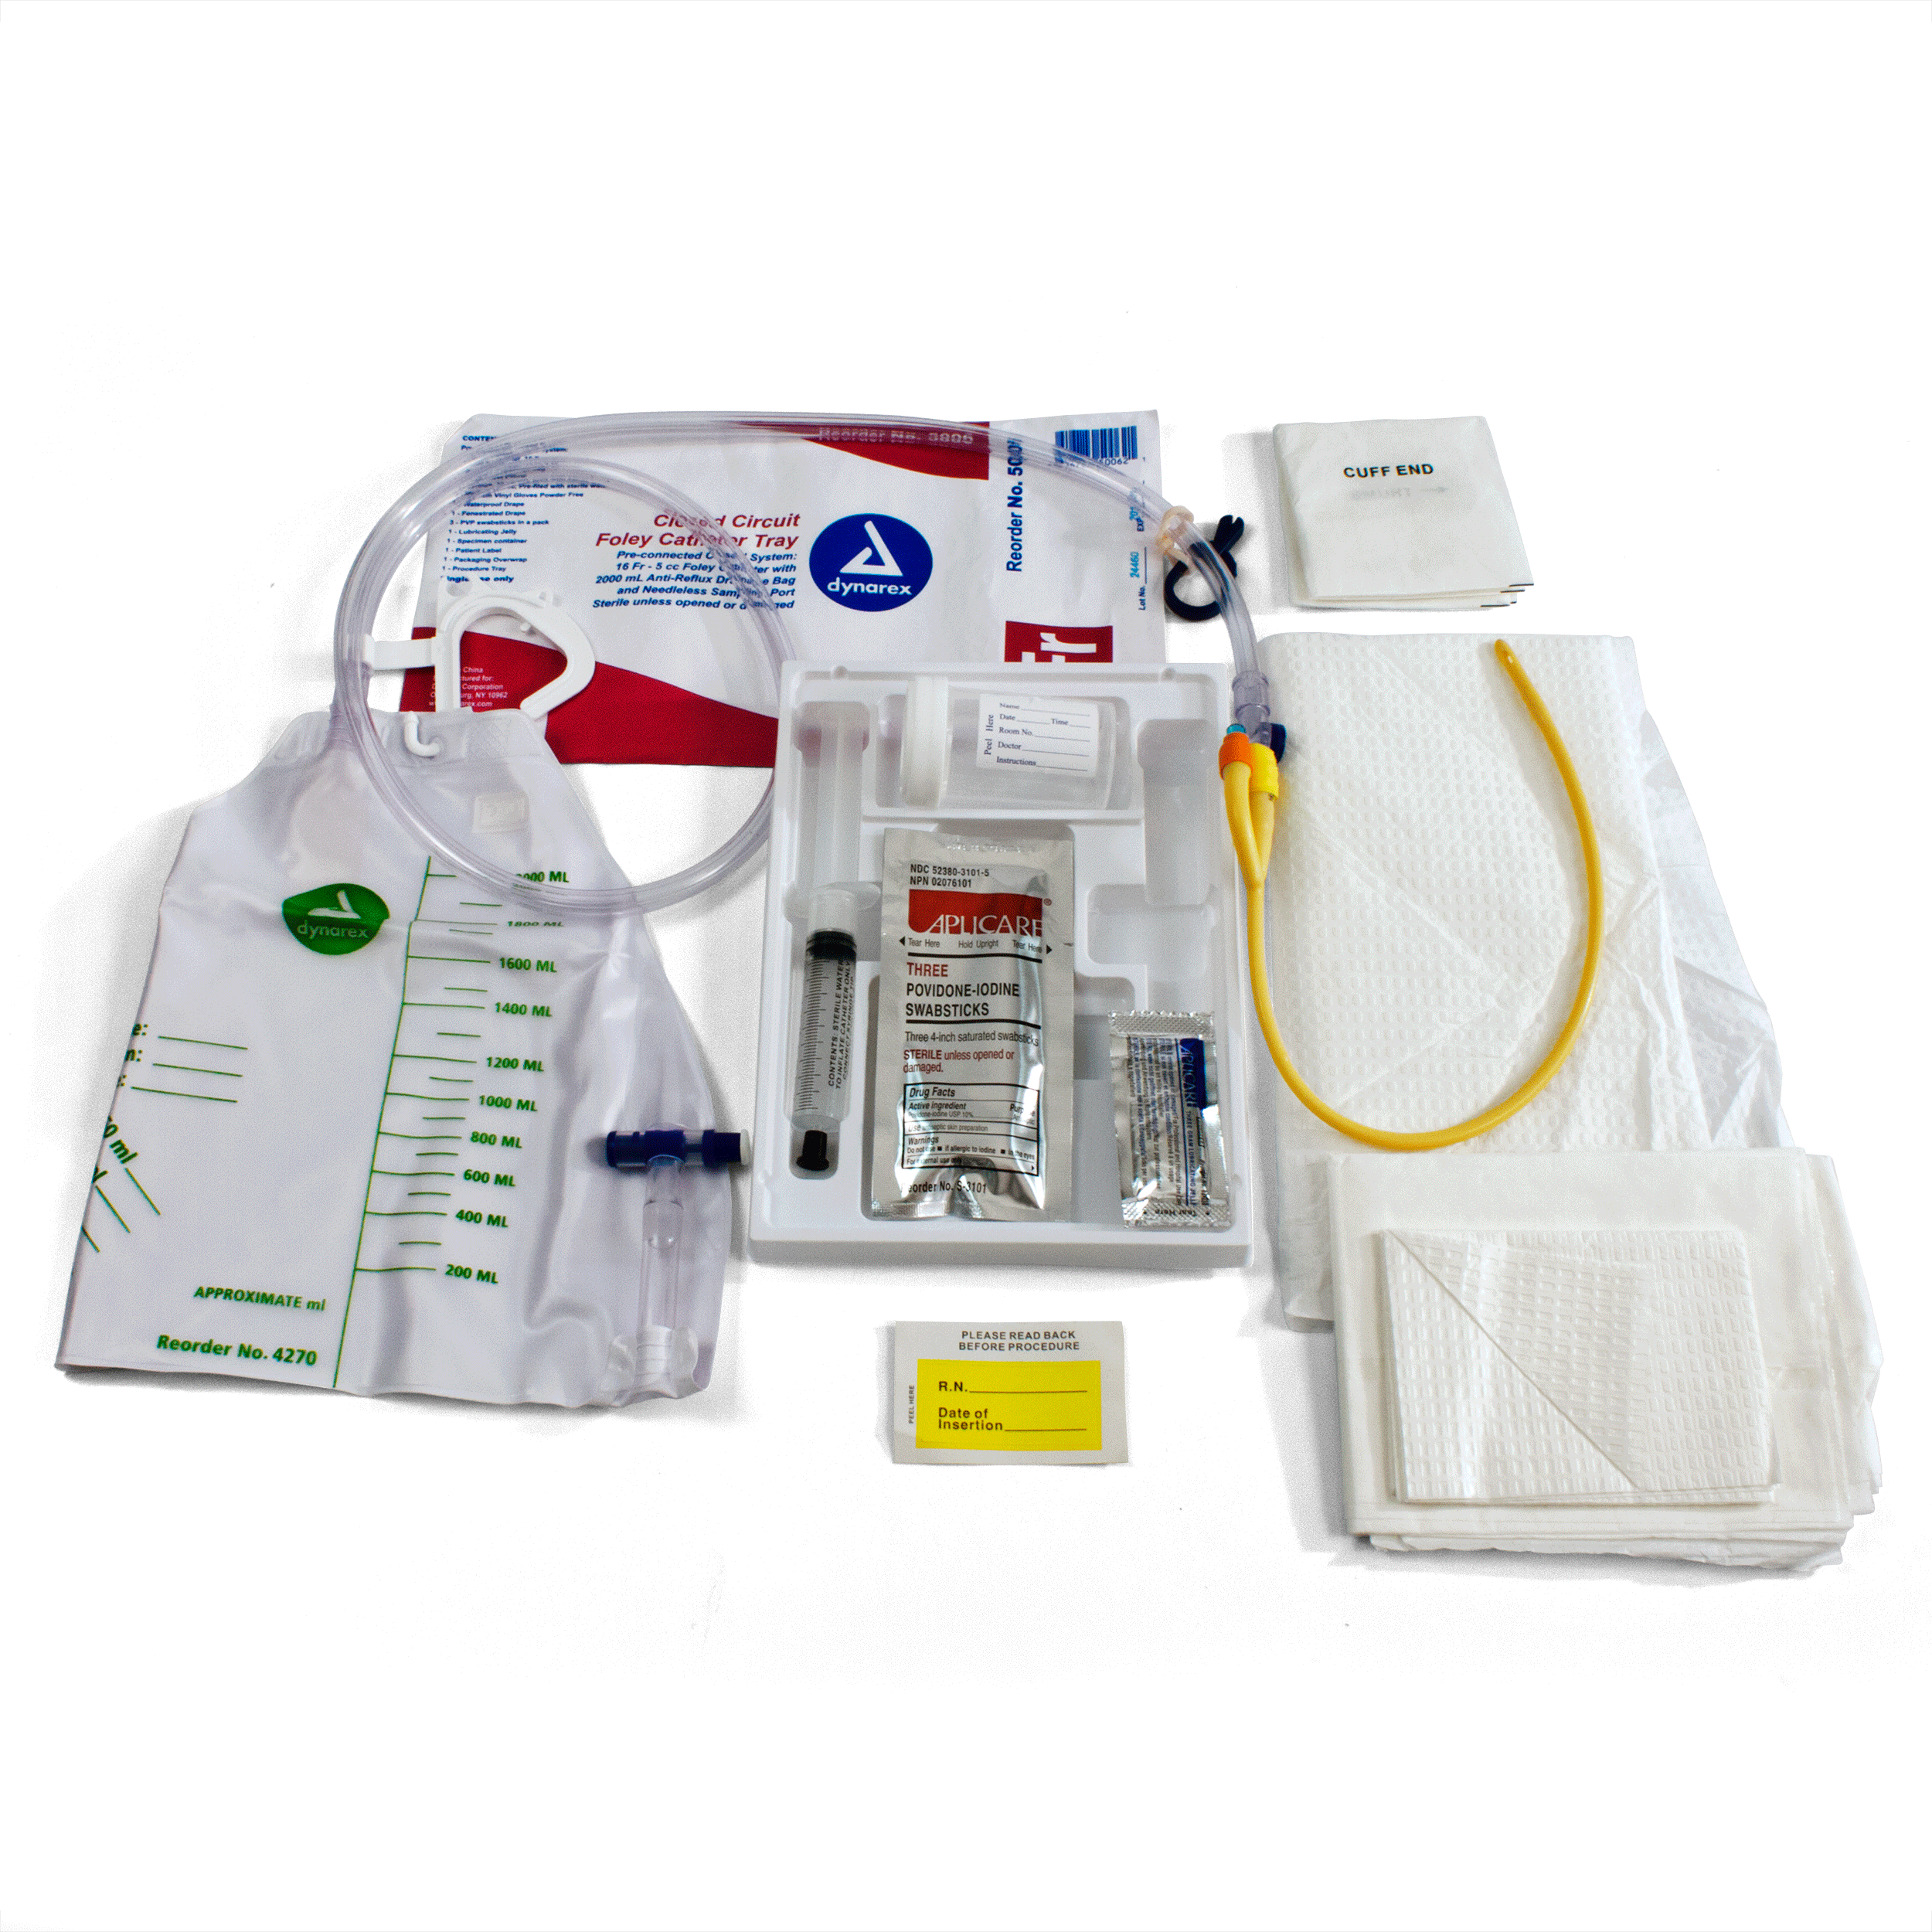 Closed System Foley Catheter Tray - Sterile 16 FR